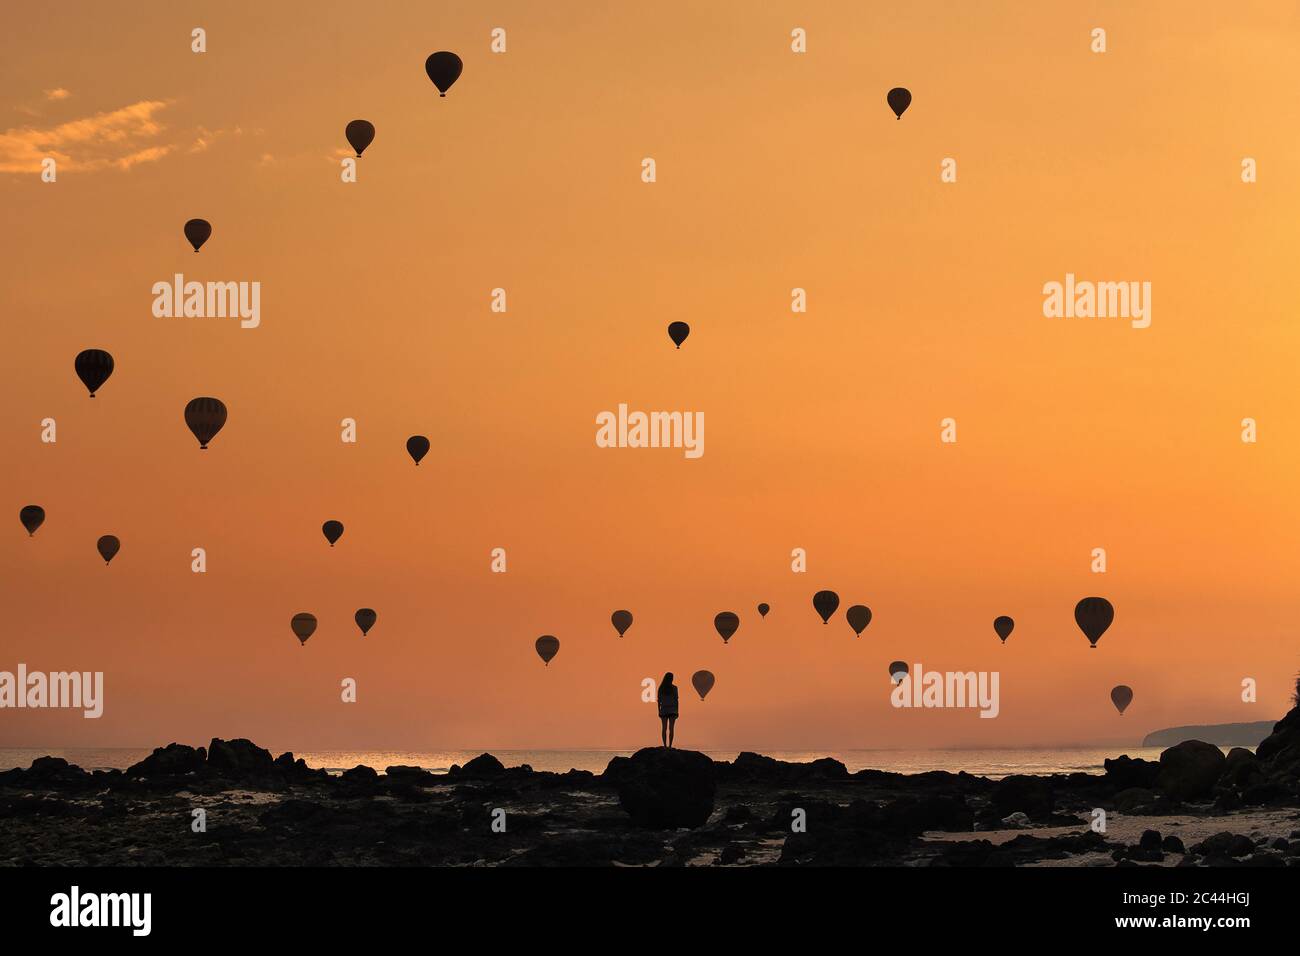 Indonesia, West Nusa Tenggara, Silhouettes of hot air balloons flying over lone woman standing on rocky shore at moody dusk Stock Photo